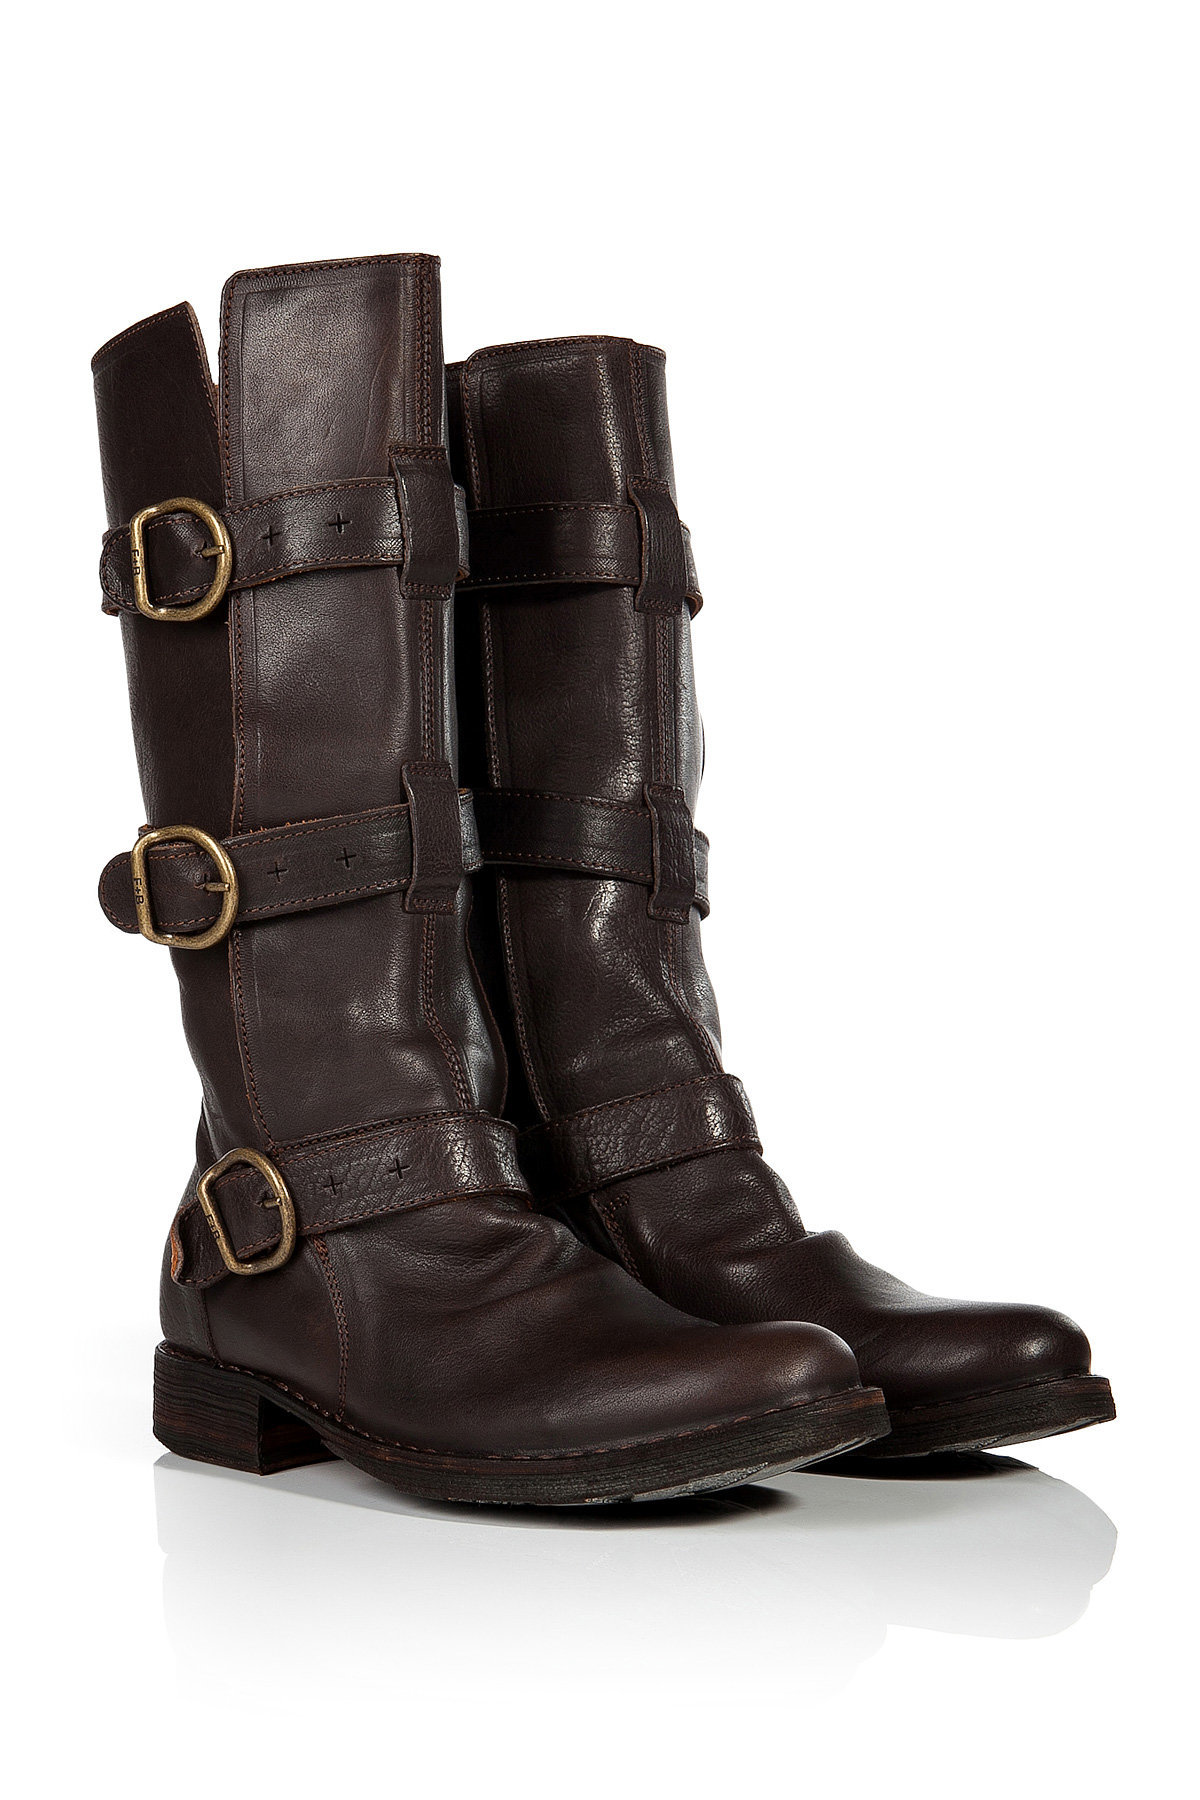 Leather Buckled Boots by Fiorentini + Baker